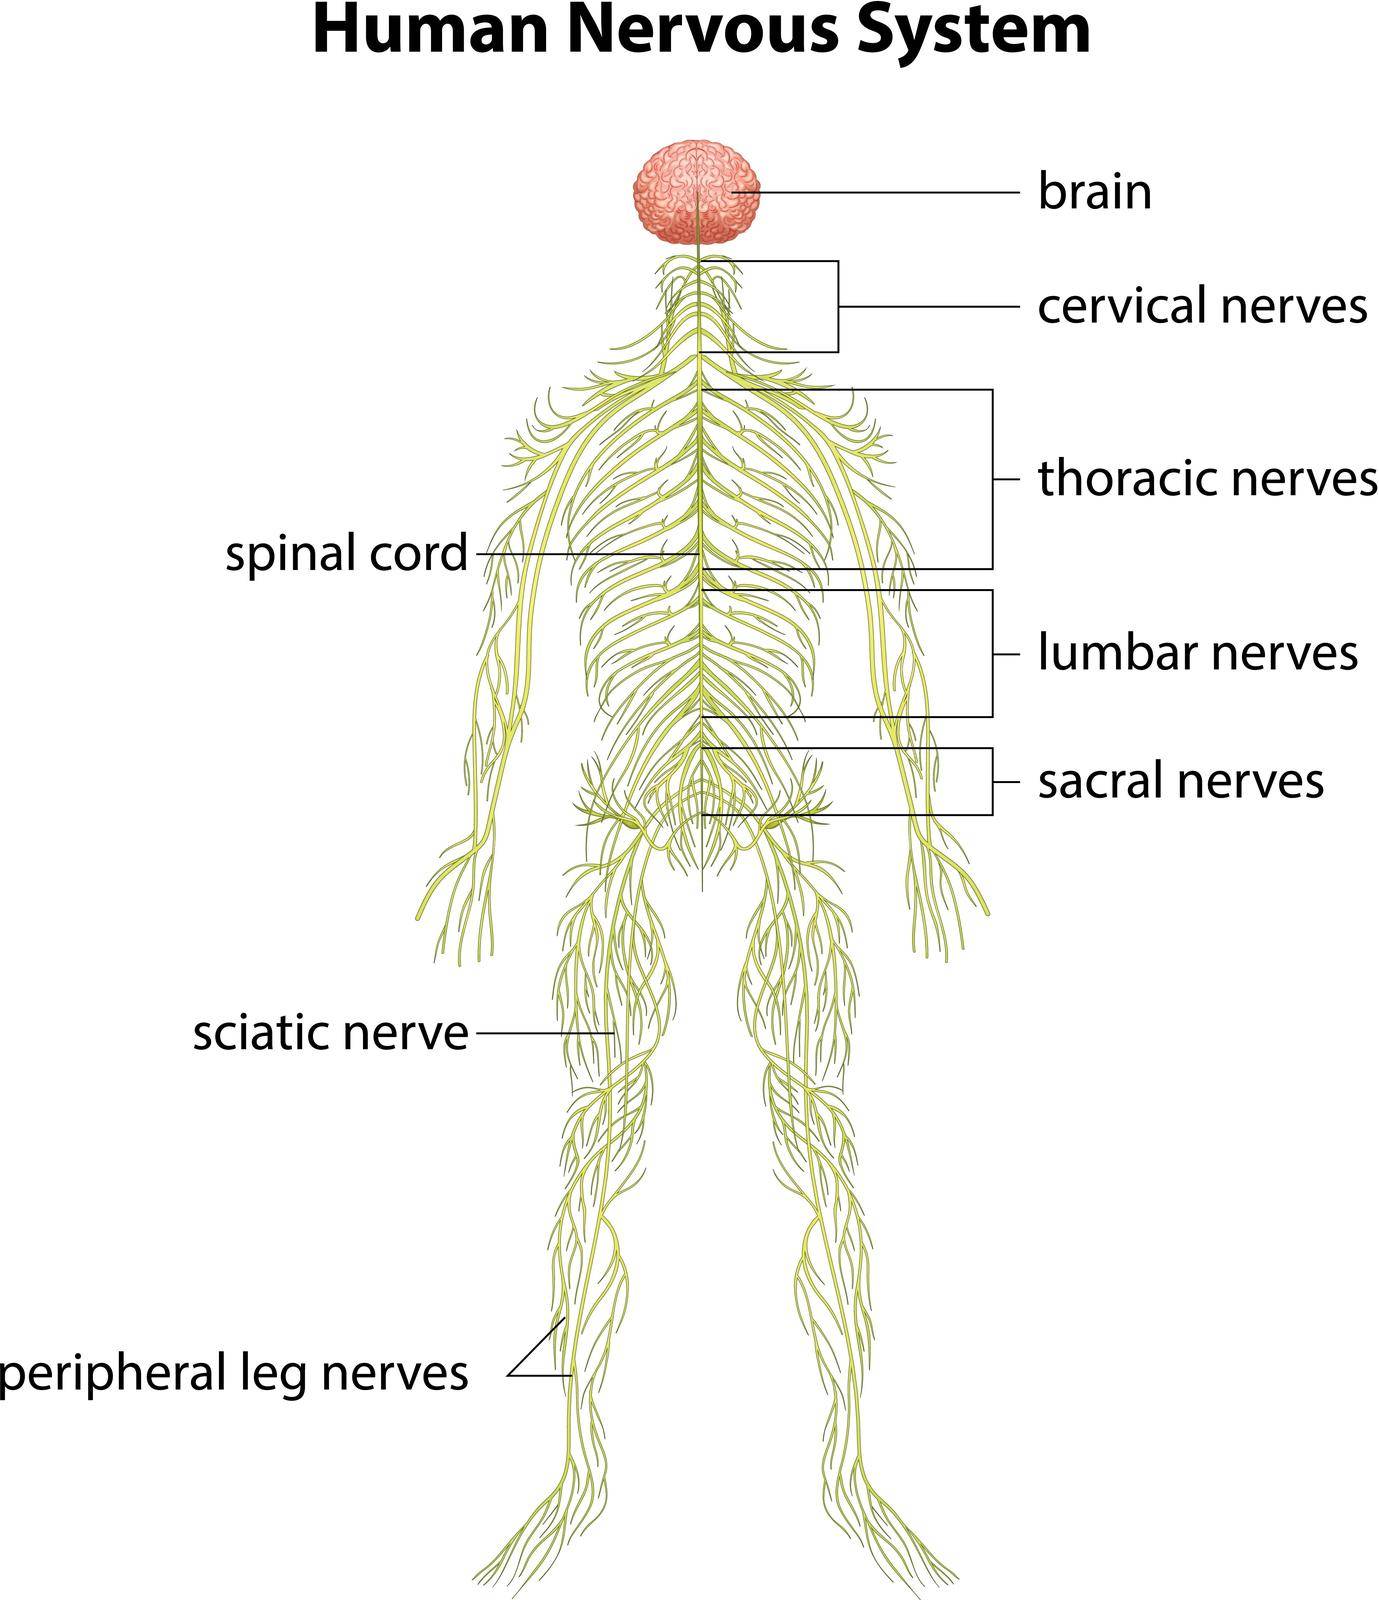 An image showing the human nervous system